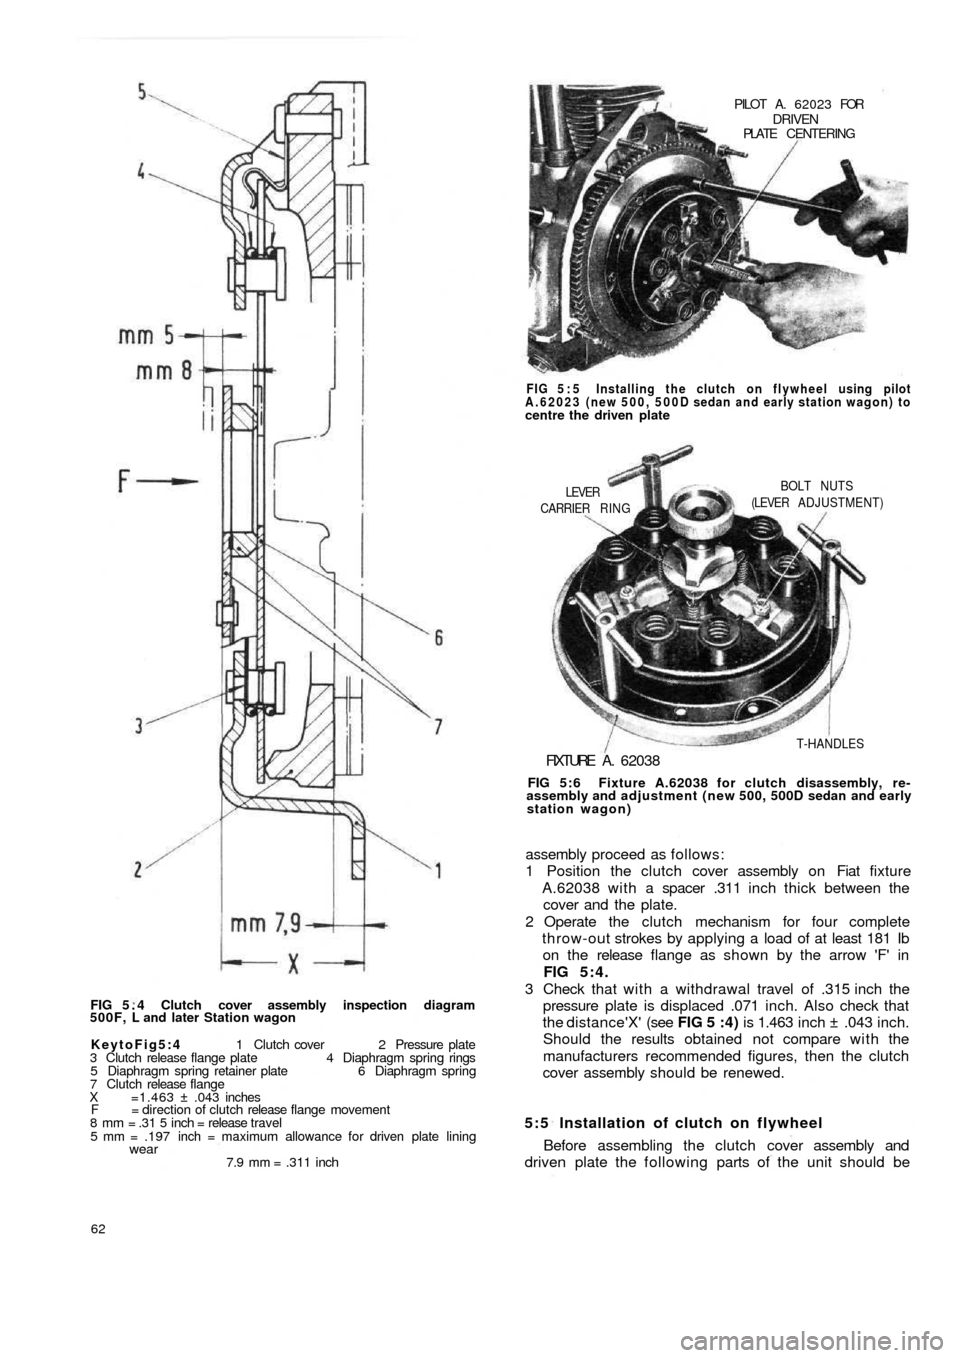 FIAT 500 1969 1.G Repair Manual FIG 5 . 4  Clutch cover assembly inspection diagram
500F, L and later Station wagon
KeytoFig5:4 1 Clutch cover 2 Pressure plate
3 Clutch release flange plate 4 Diaphragm spring rings
5 Diaphragm sprin